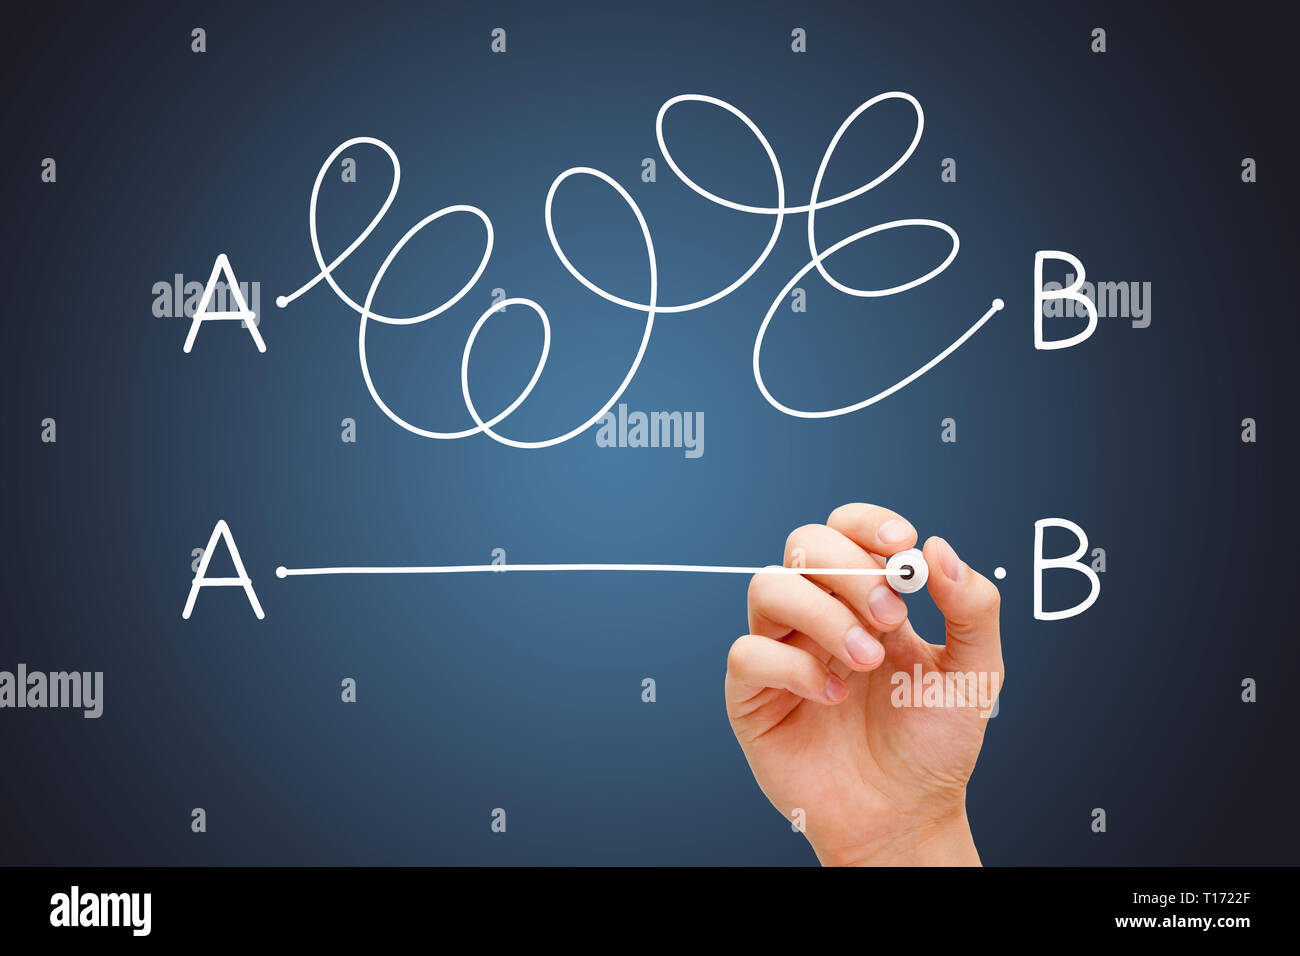 Hand drawing a conceptual diagram about the importance to find the shortest way to go from point A to point B, or a simple solution to a problem. Stock Photo